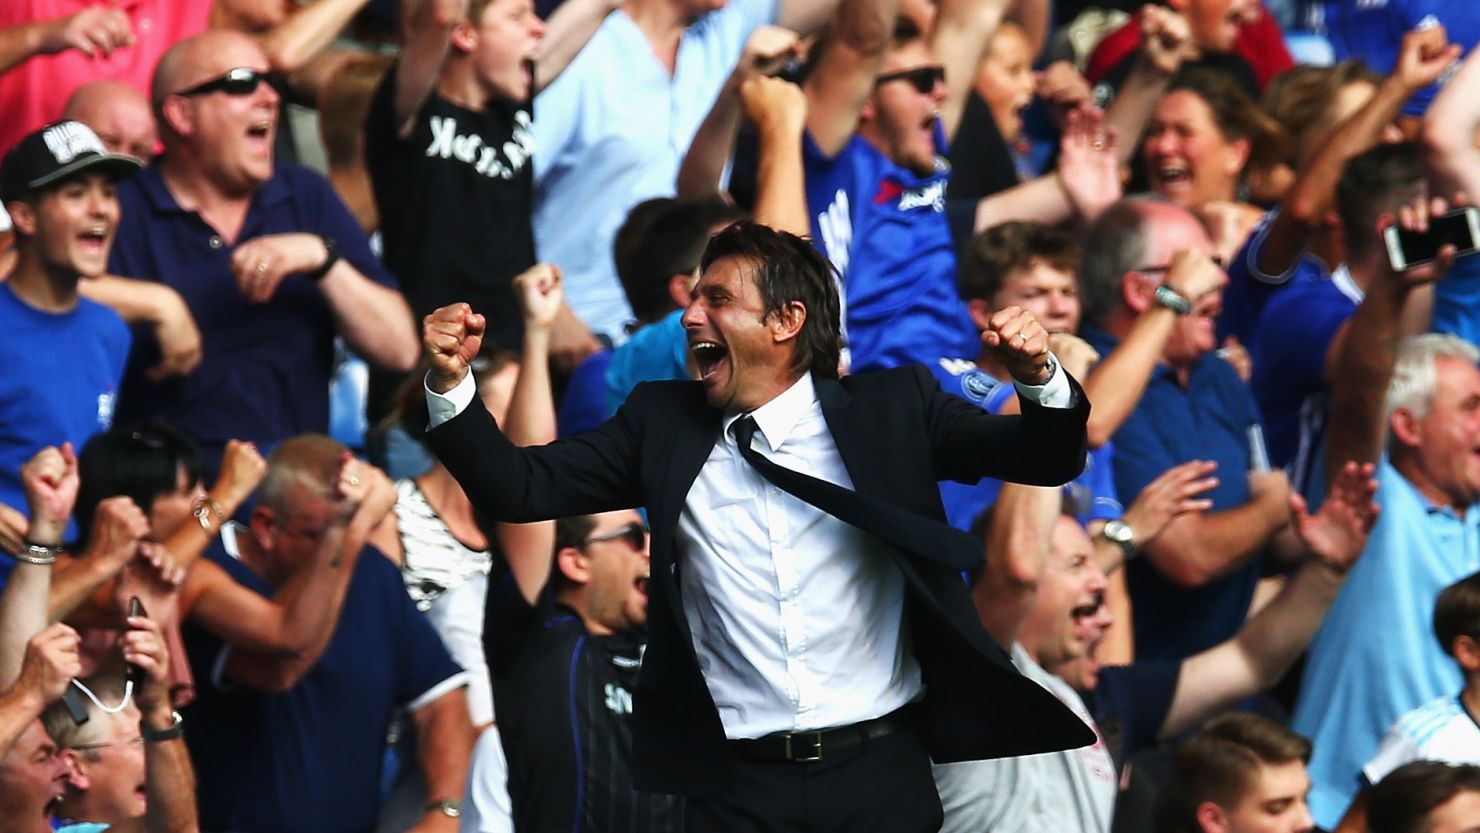 LONDON, ENGLAND - AUGUST 27:  Antonio Conte, Manager of Chelsea celebrates his sides third goal during the Premier League match between Chelsea and Burnley at Stamford Bridge on August 27, 2016 in London, England.  (Photo by Steve Bardens/Getty Images)